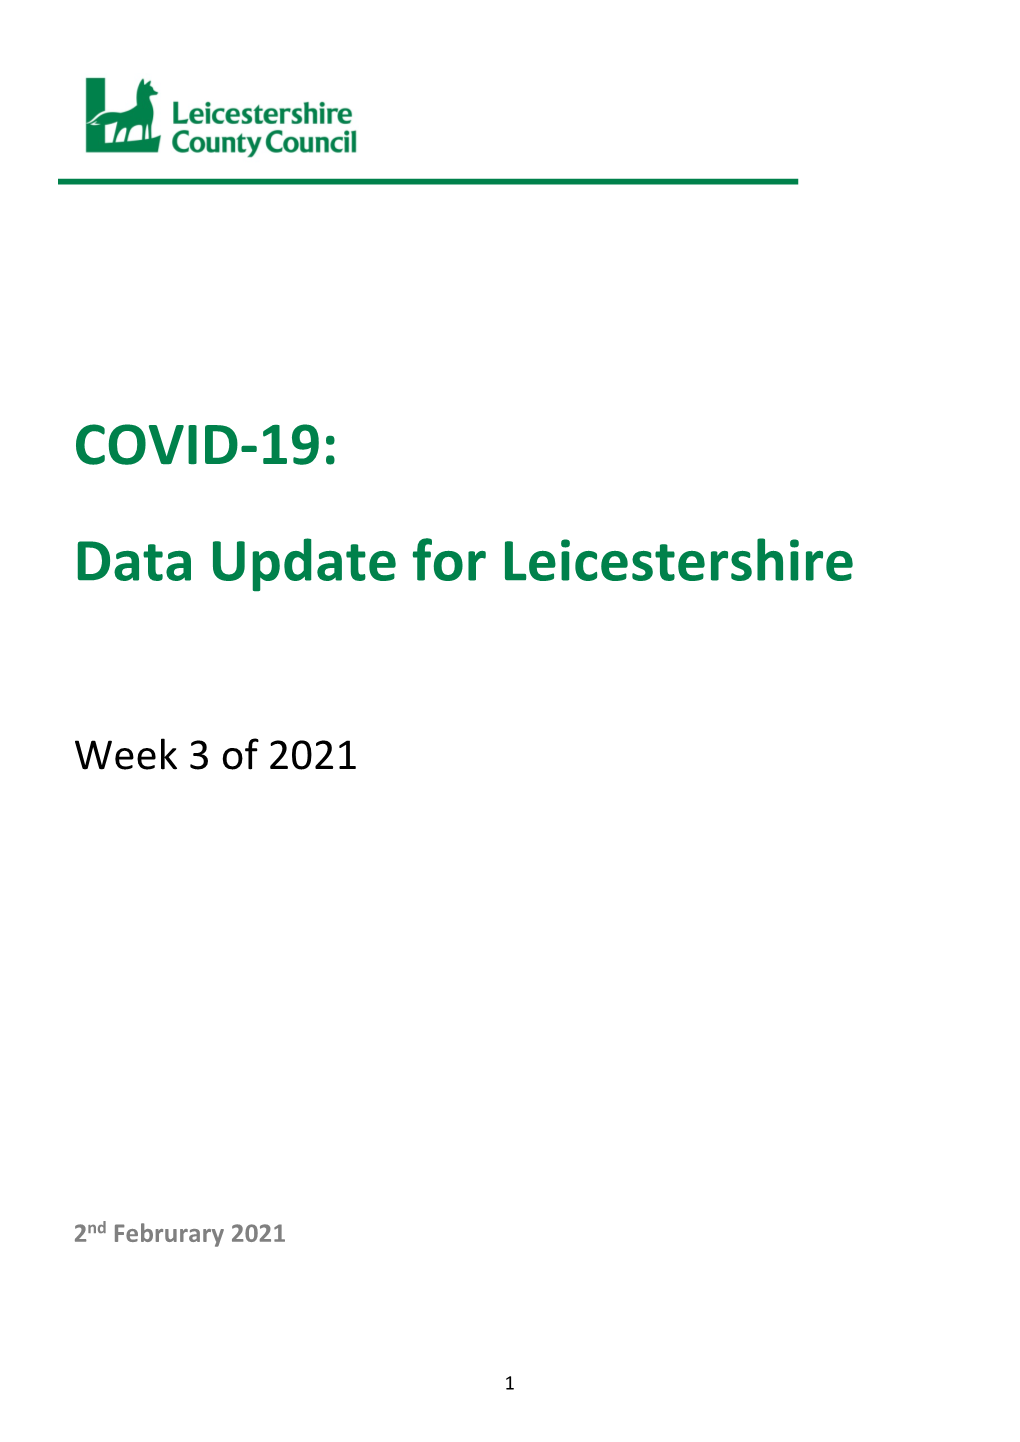 COVID-19 Data Update for Leicestershire (Week 3 of 2021)